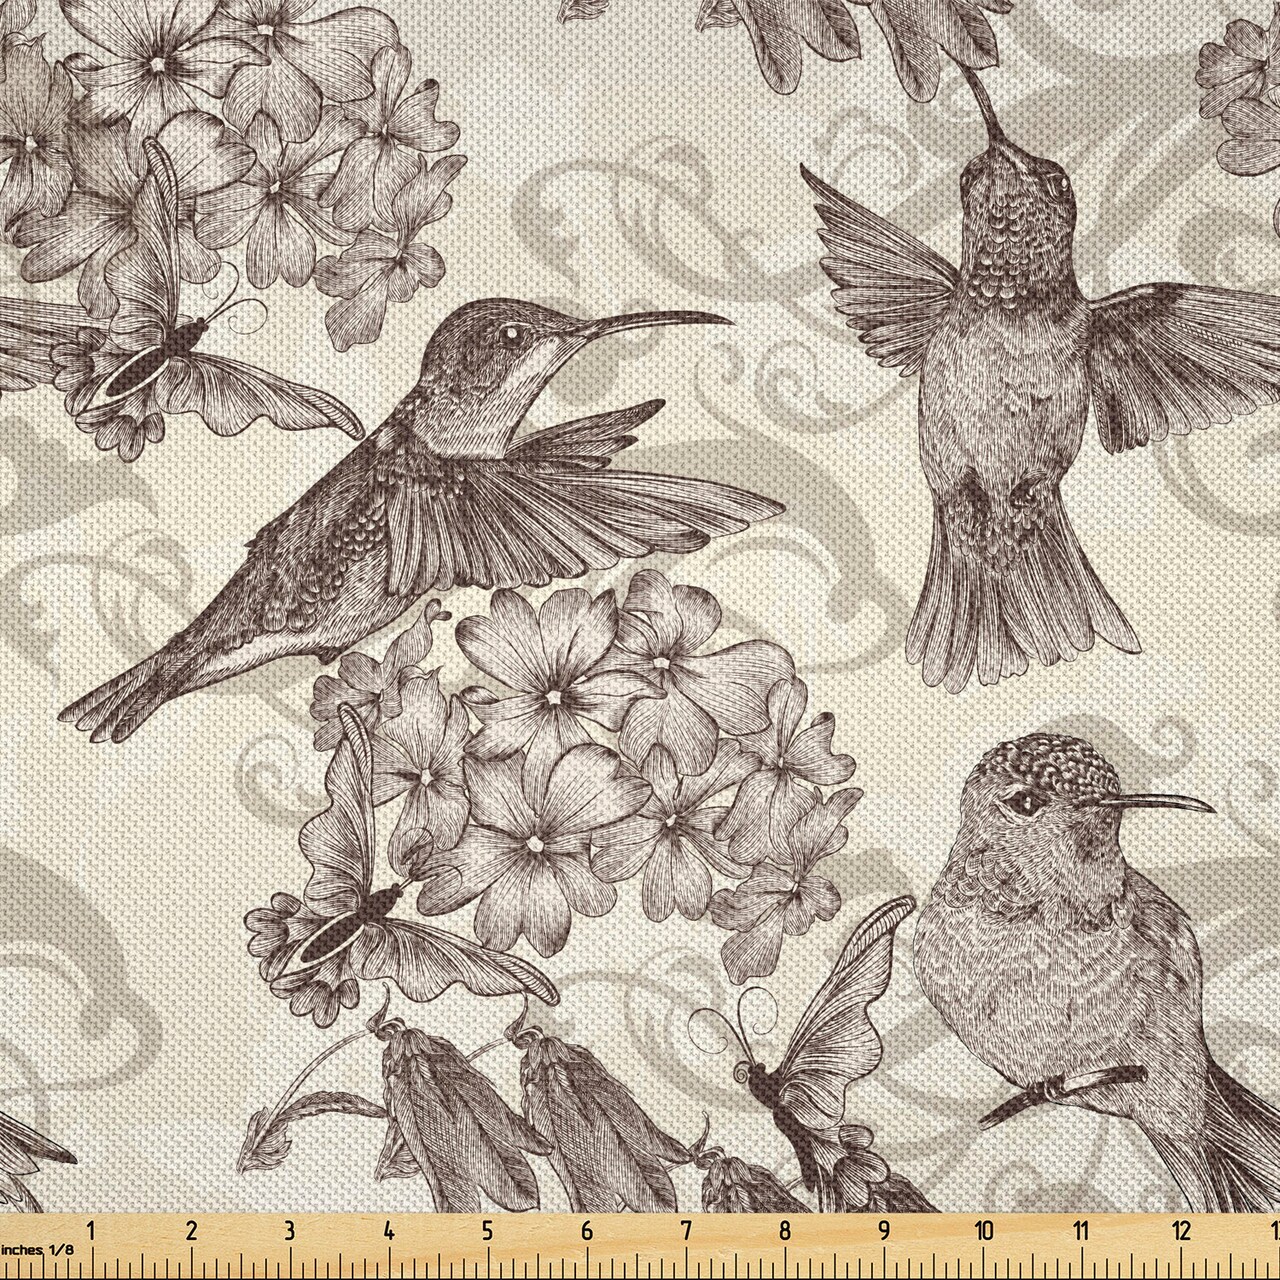 Ambesonne Hummingbirds Fabric by The Yard, Birds and Flowers Monochromic Classical Design Nostalgia Ornate, Decorative Satin Fabric for Home Textiles and Crafts, 10 Yards, Cream Beige Brown